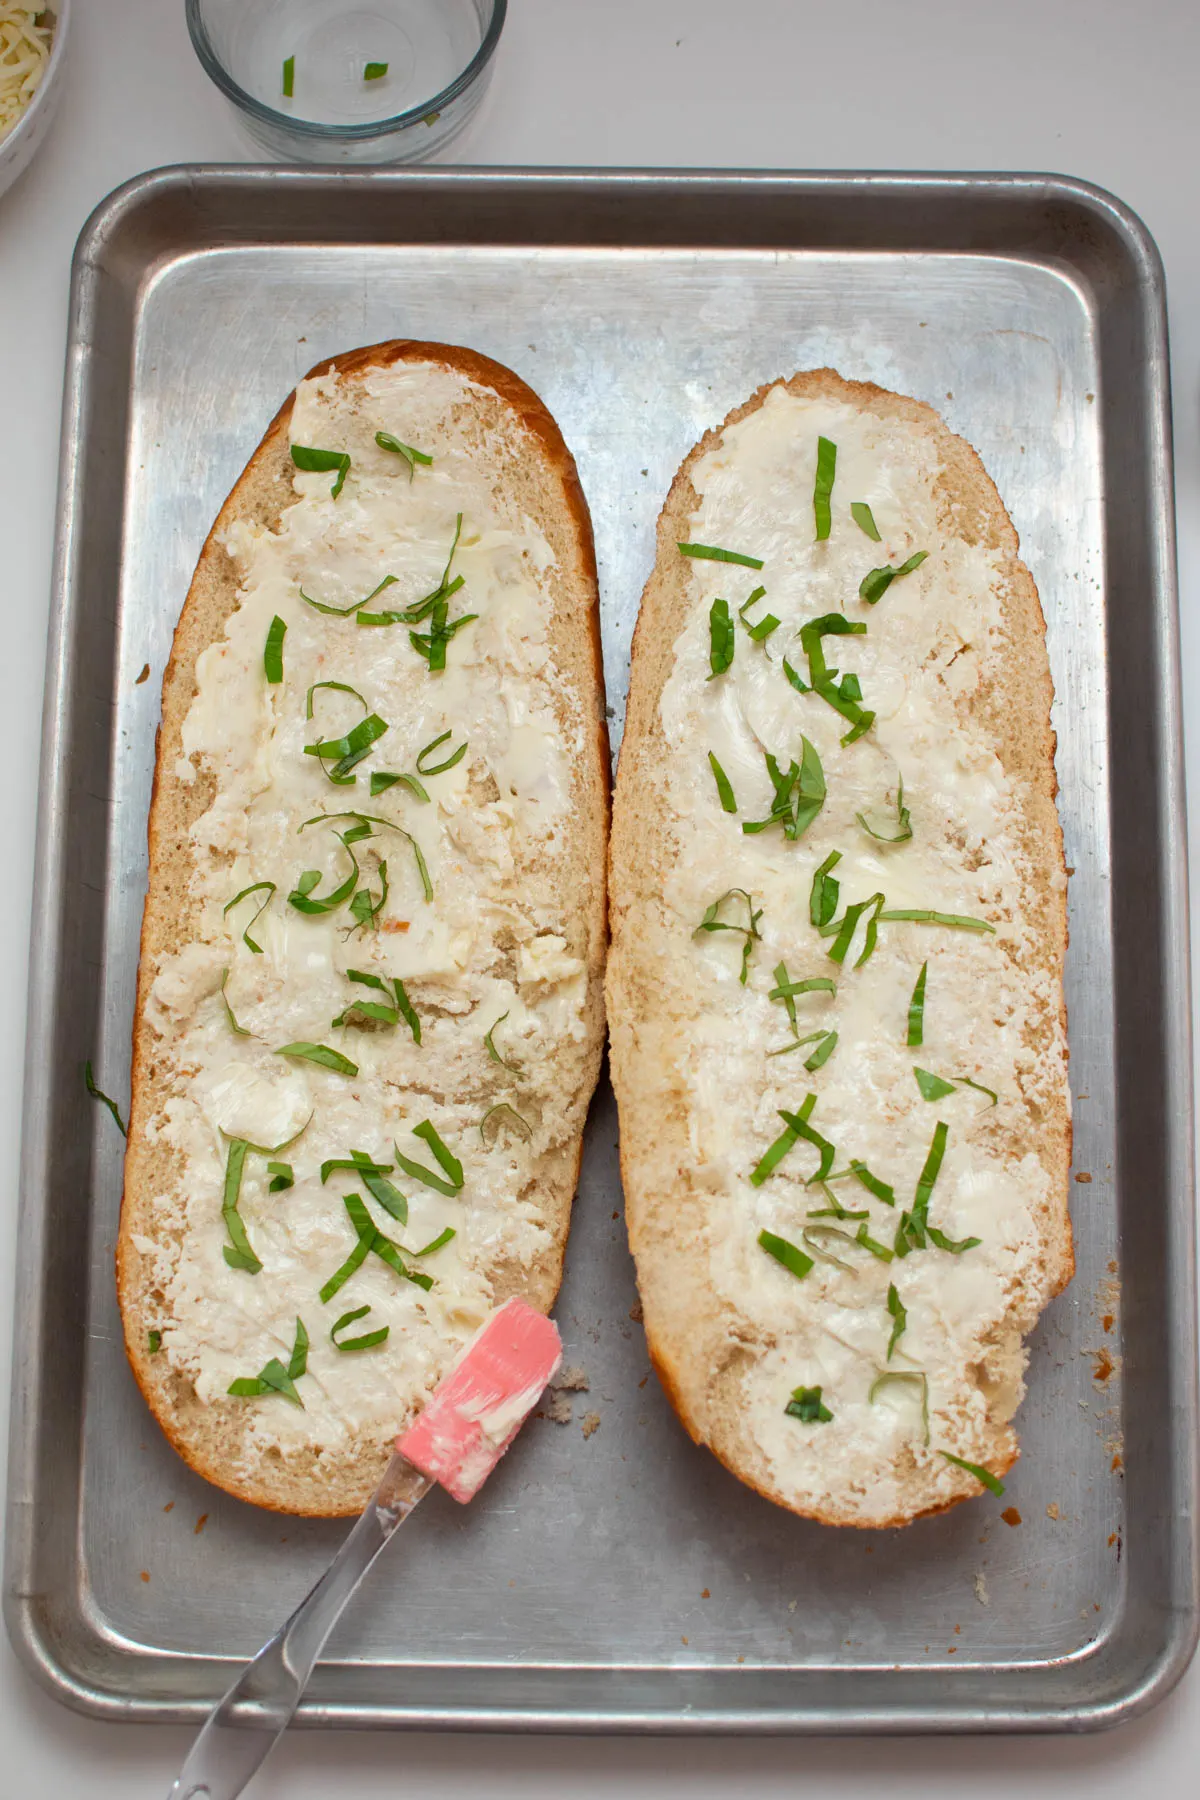 Two French bread halves with butter and basil ribbons on baking sheet.